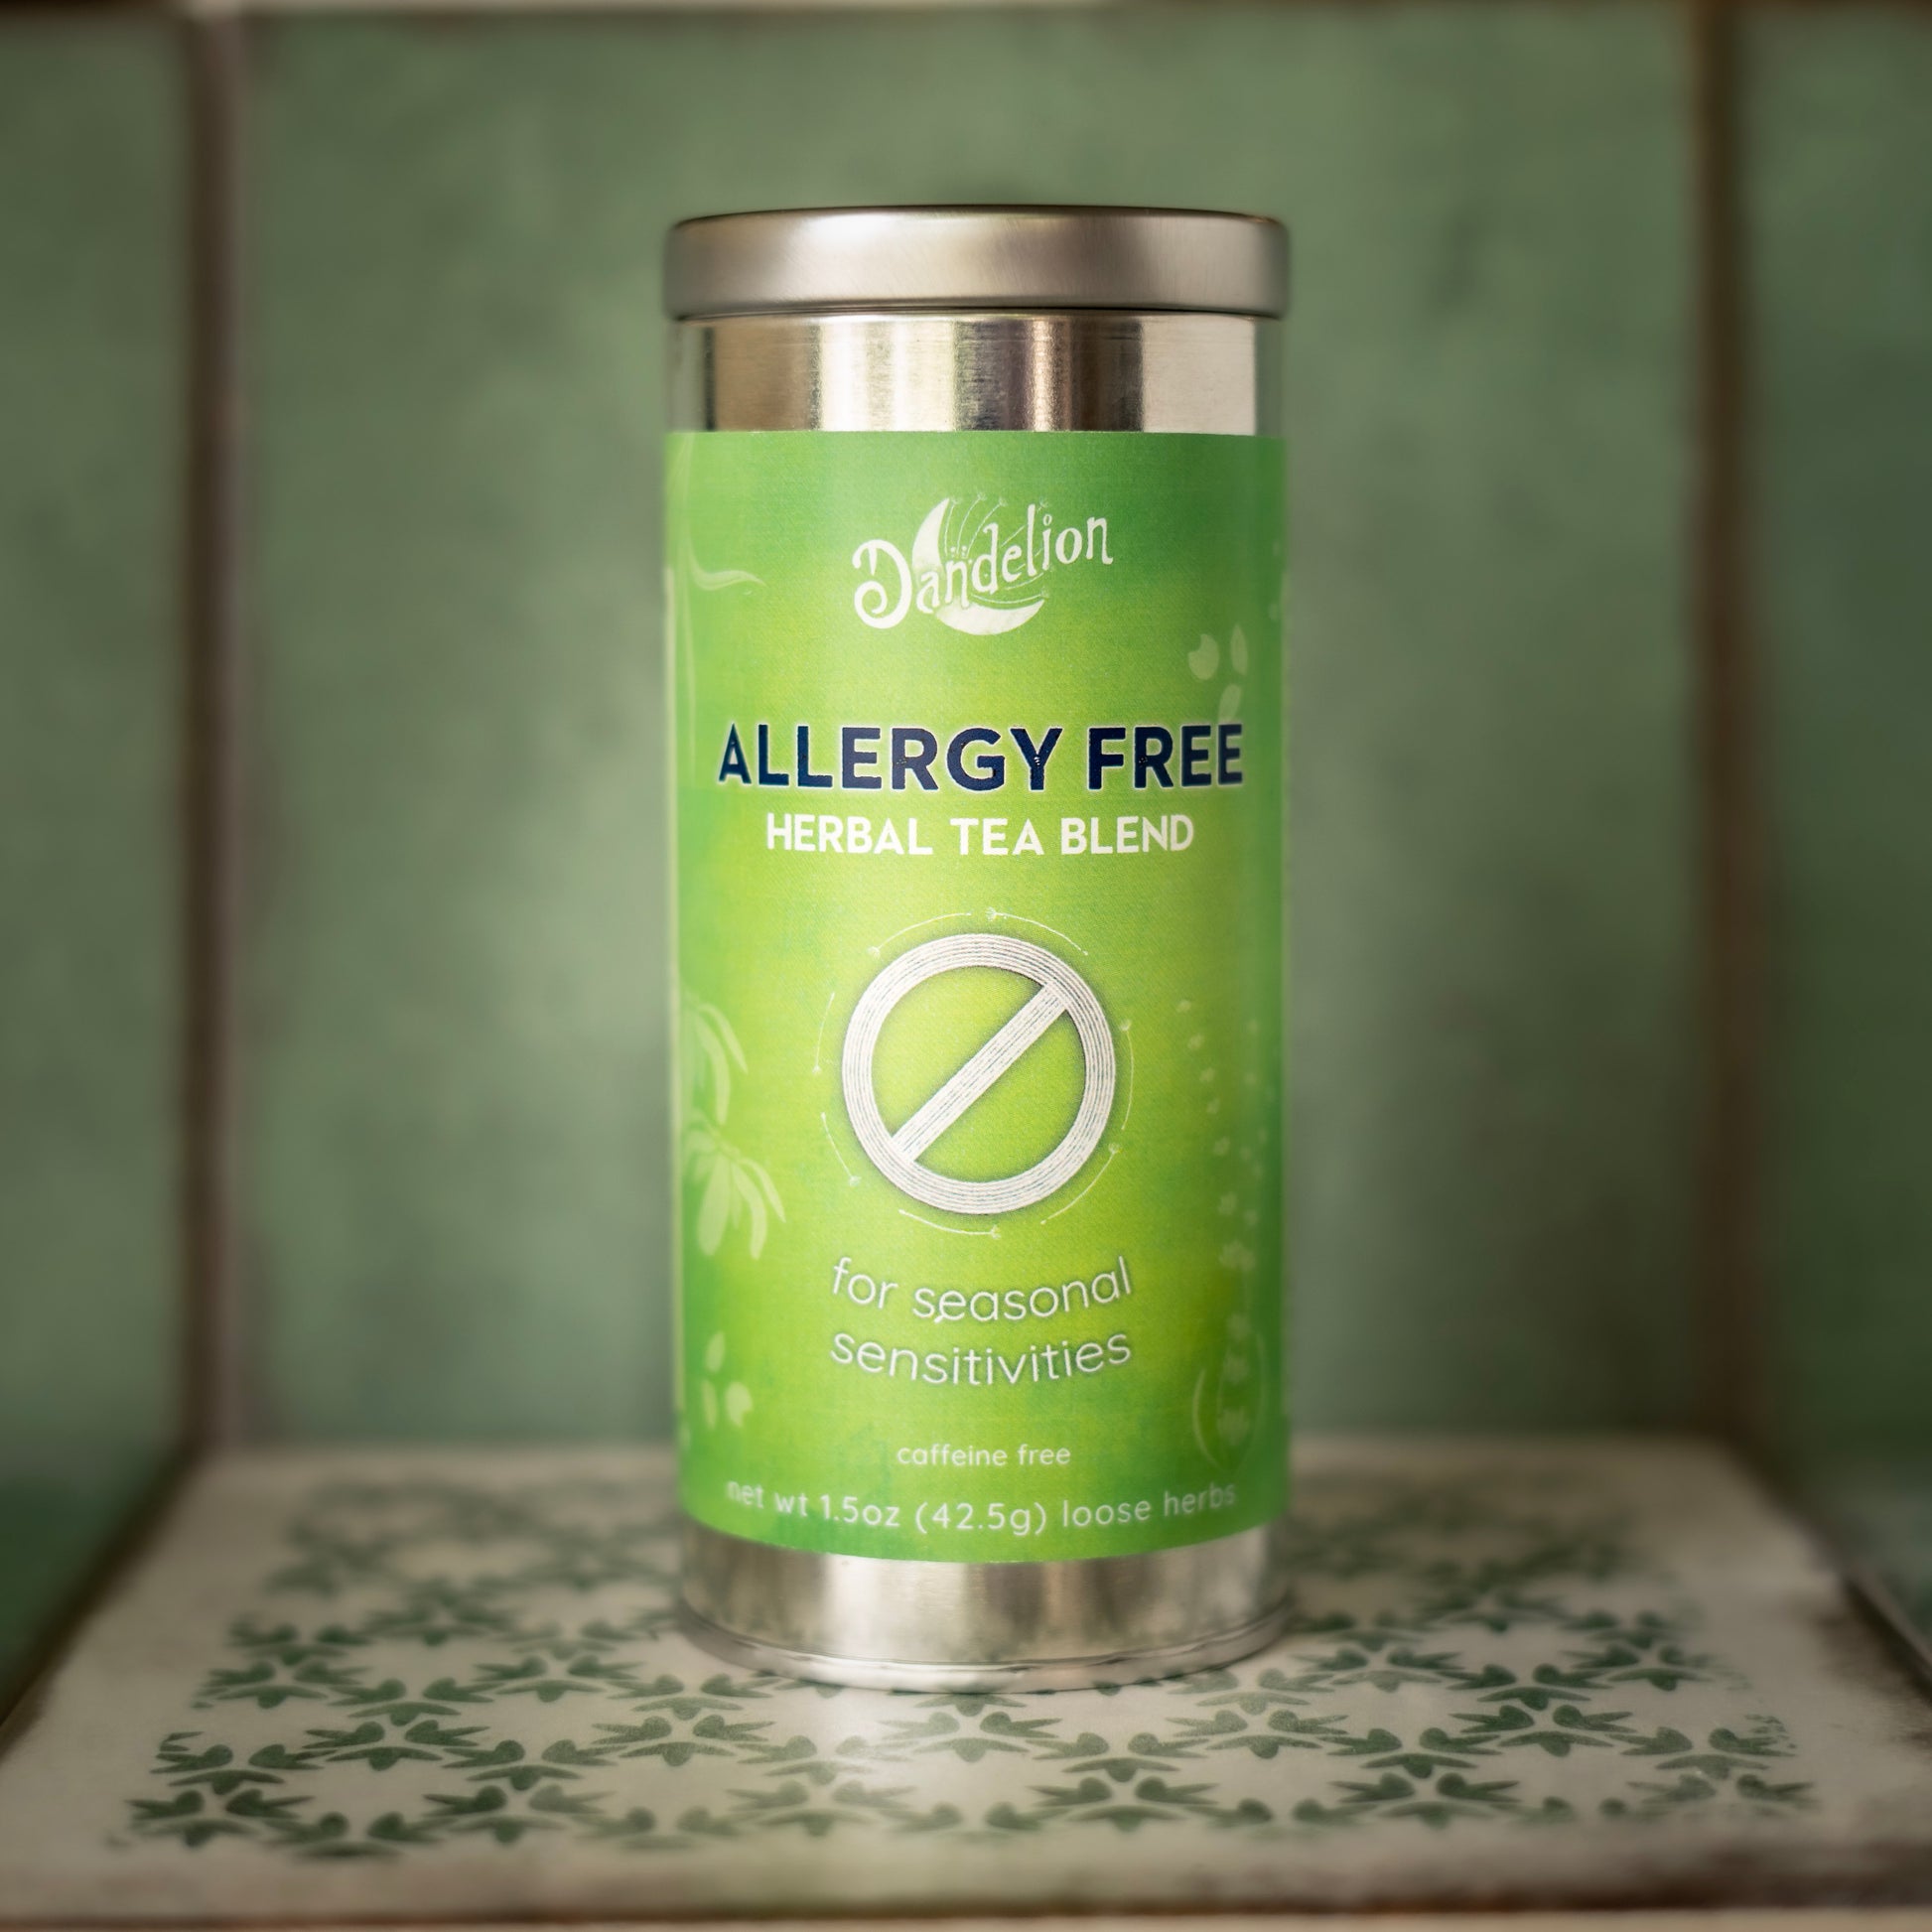 dandelion teahouse's allergy free herbal tea blend canister with a green label